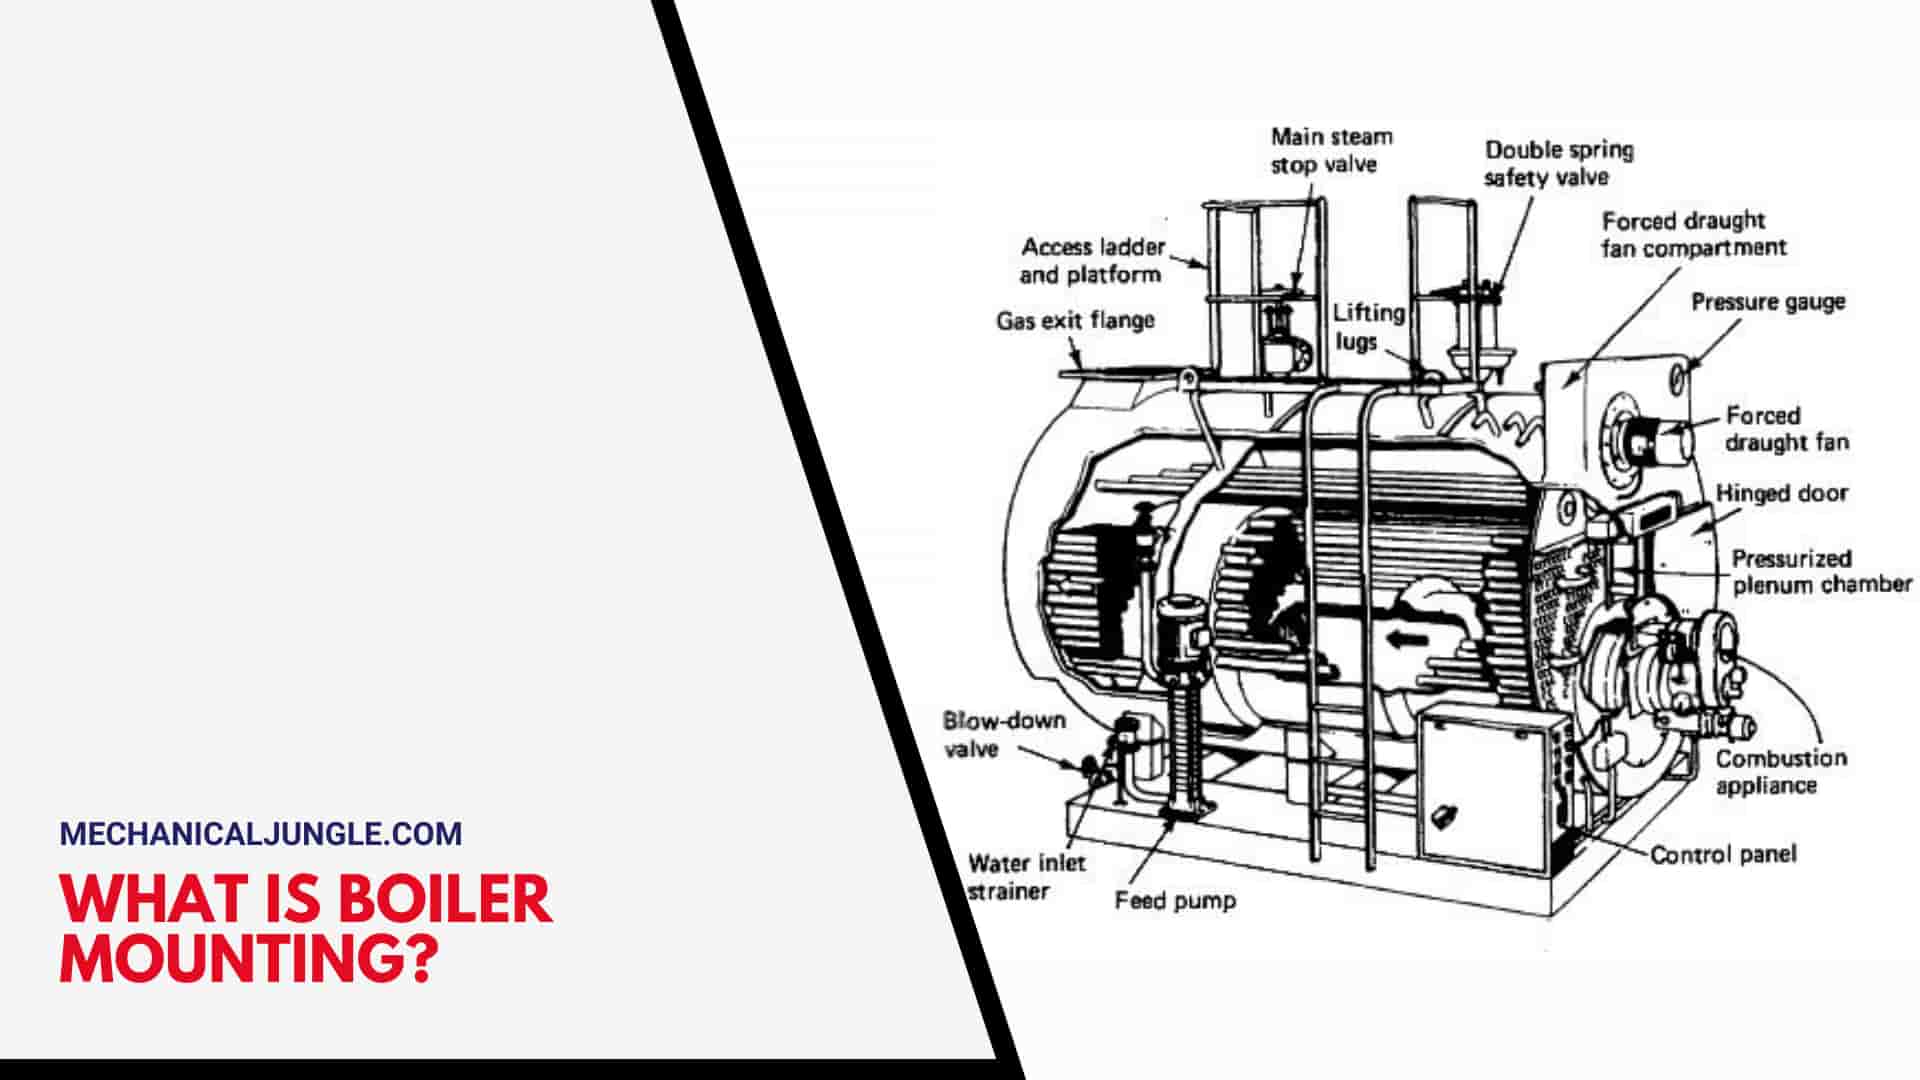 What Is Boiler Mounting?